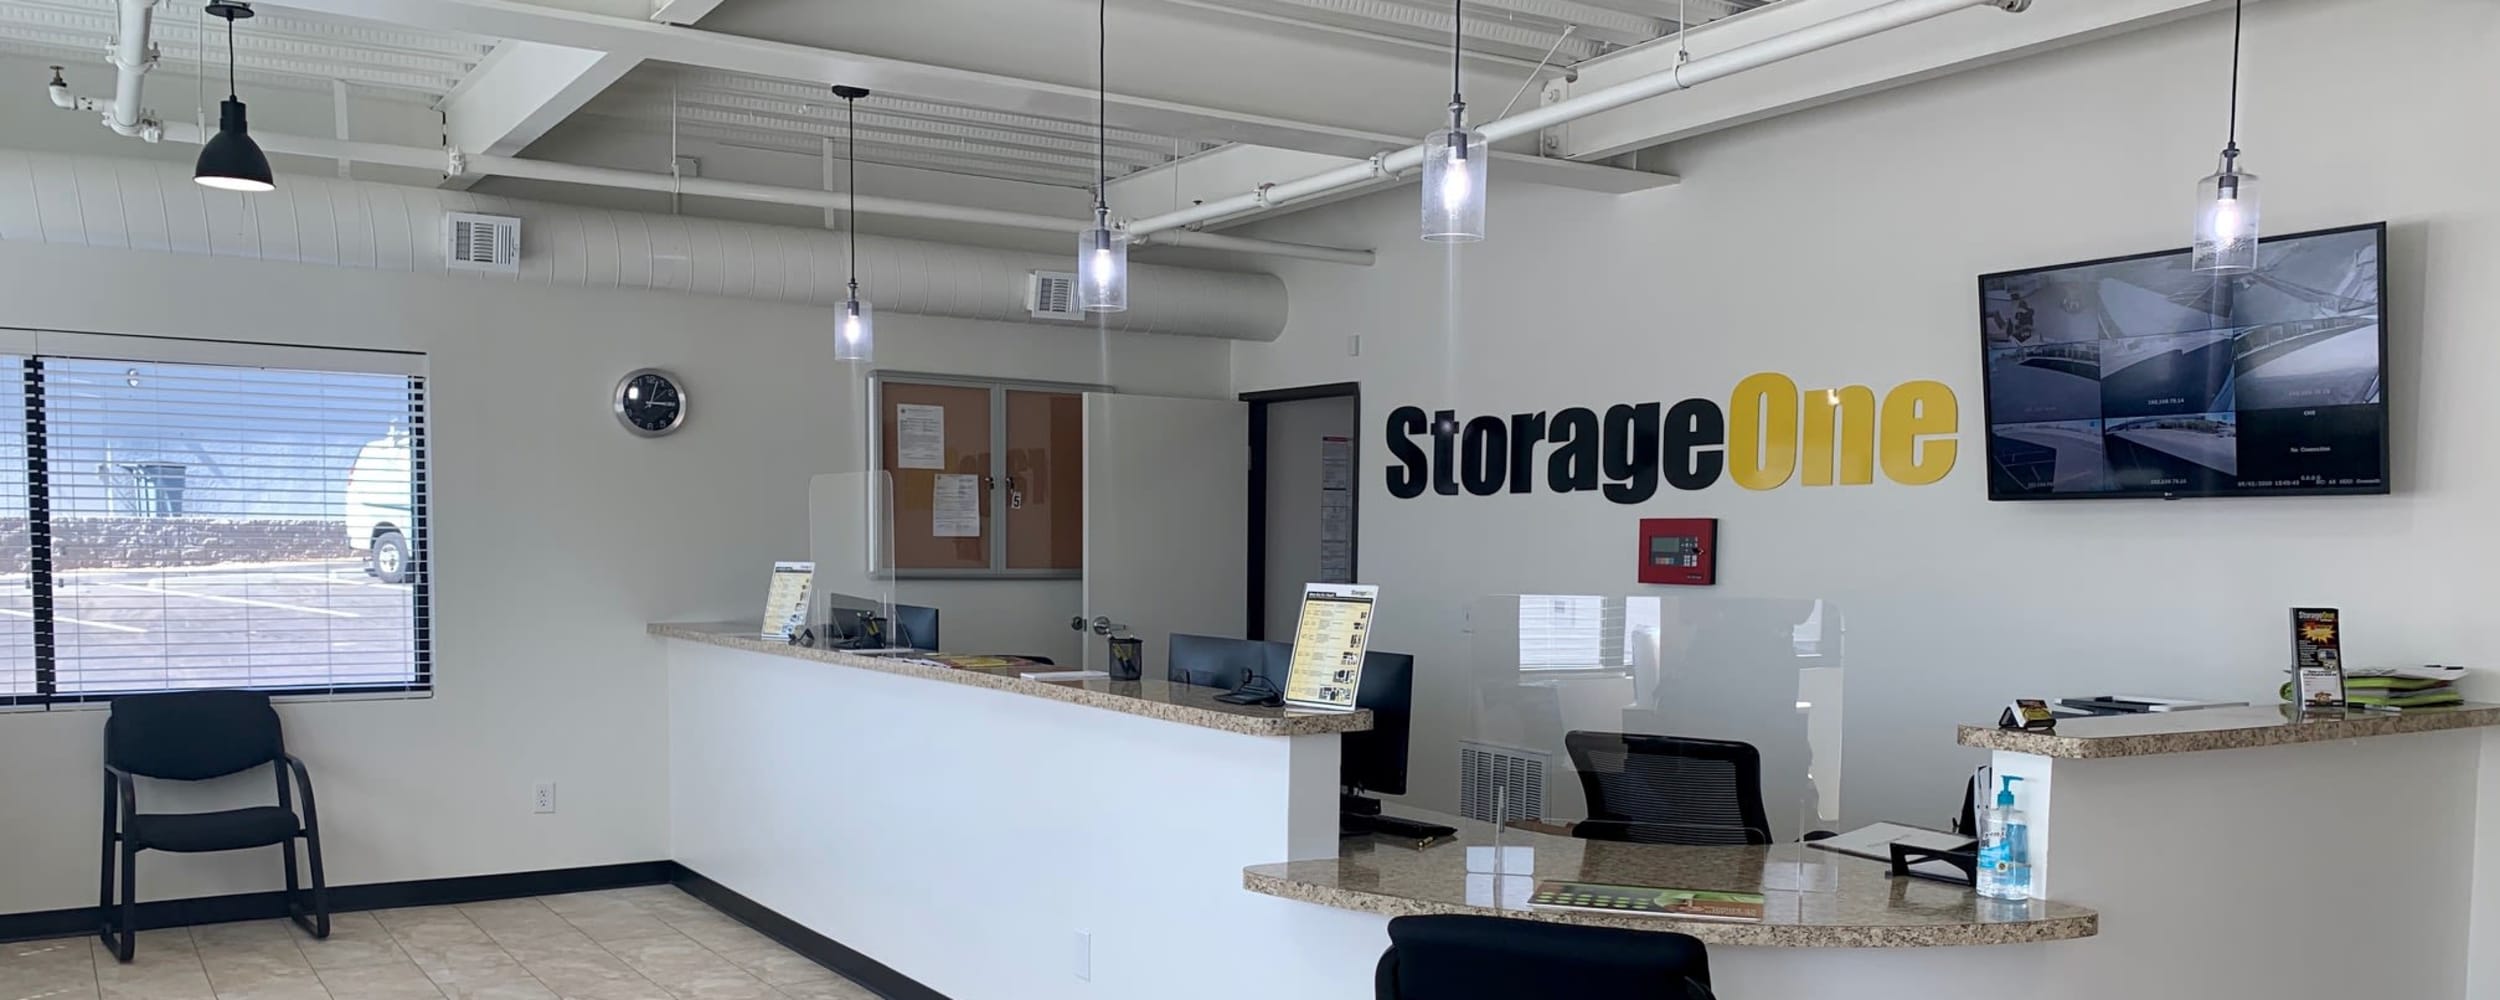 StorageOne Centennial and Losee offers a Reception in North Las Vegas, Nevada